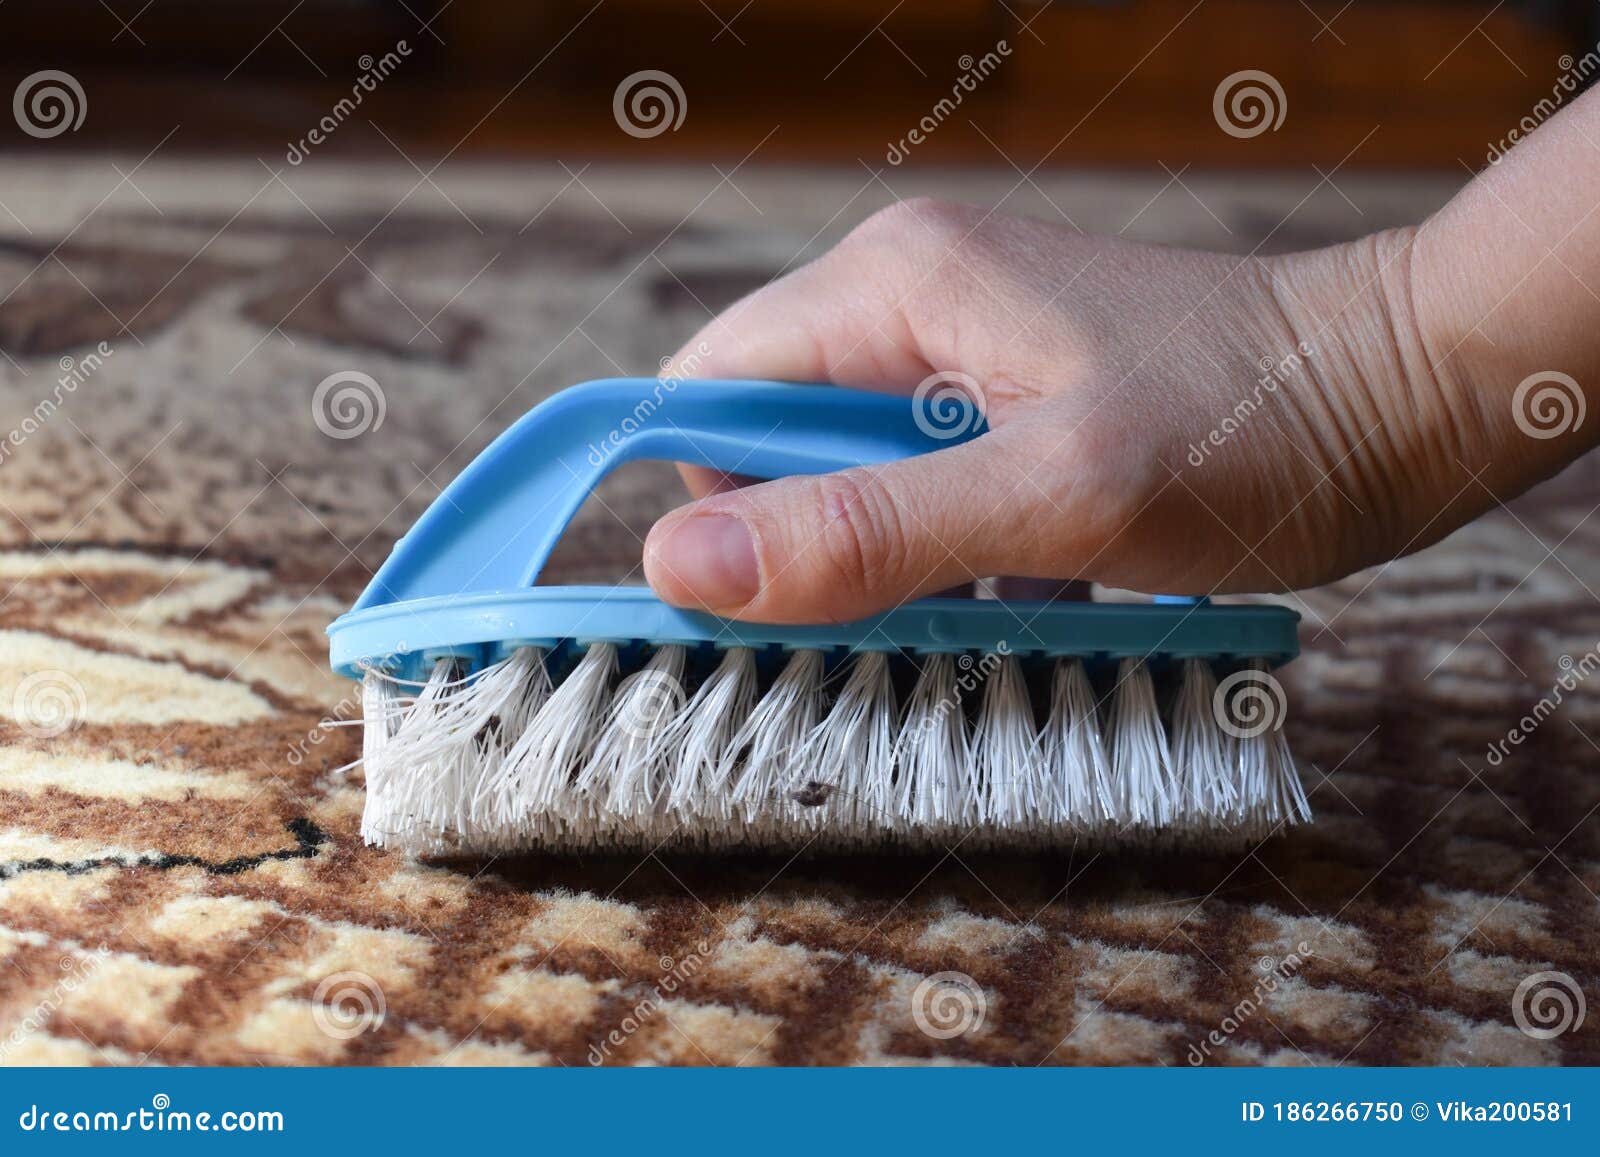 Hand Brush for the Floor Carpet. a Female Hand Cleans a Rug from Debris.  Stock Photo - Image of carpet, home: 186266750